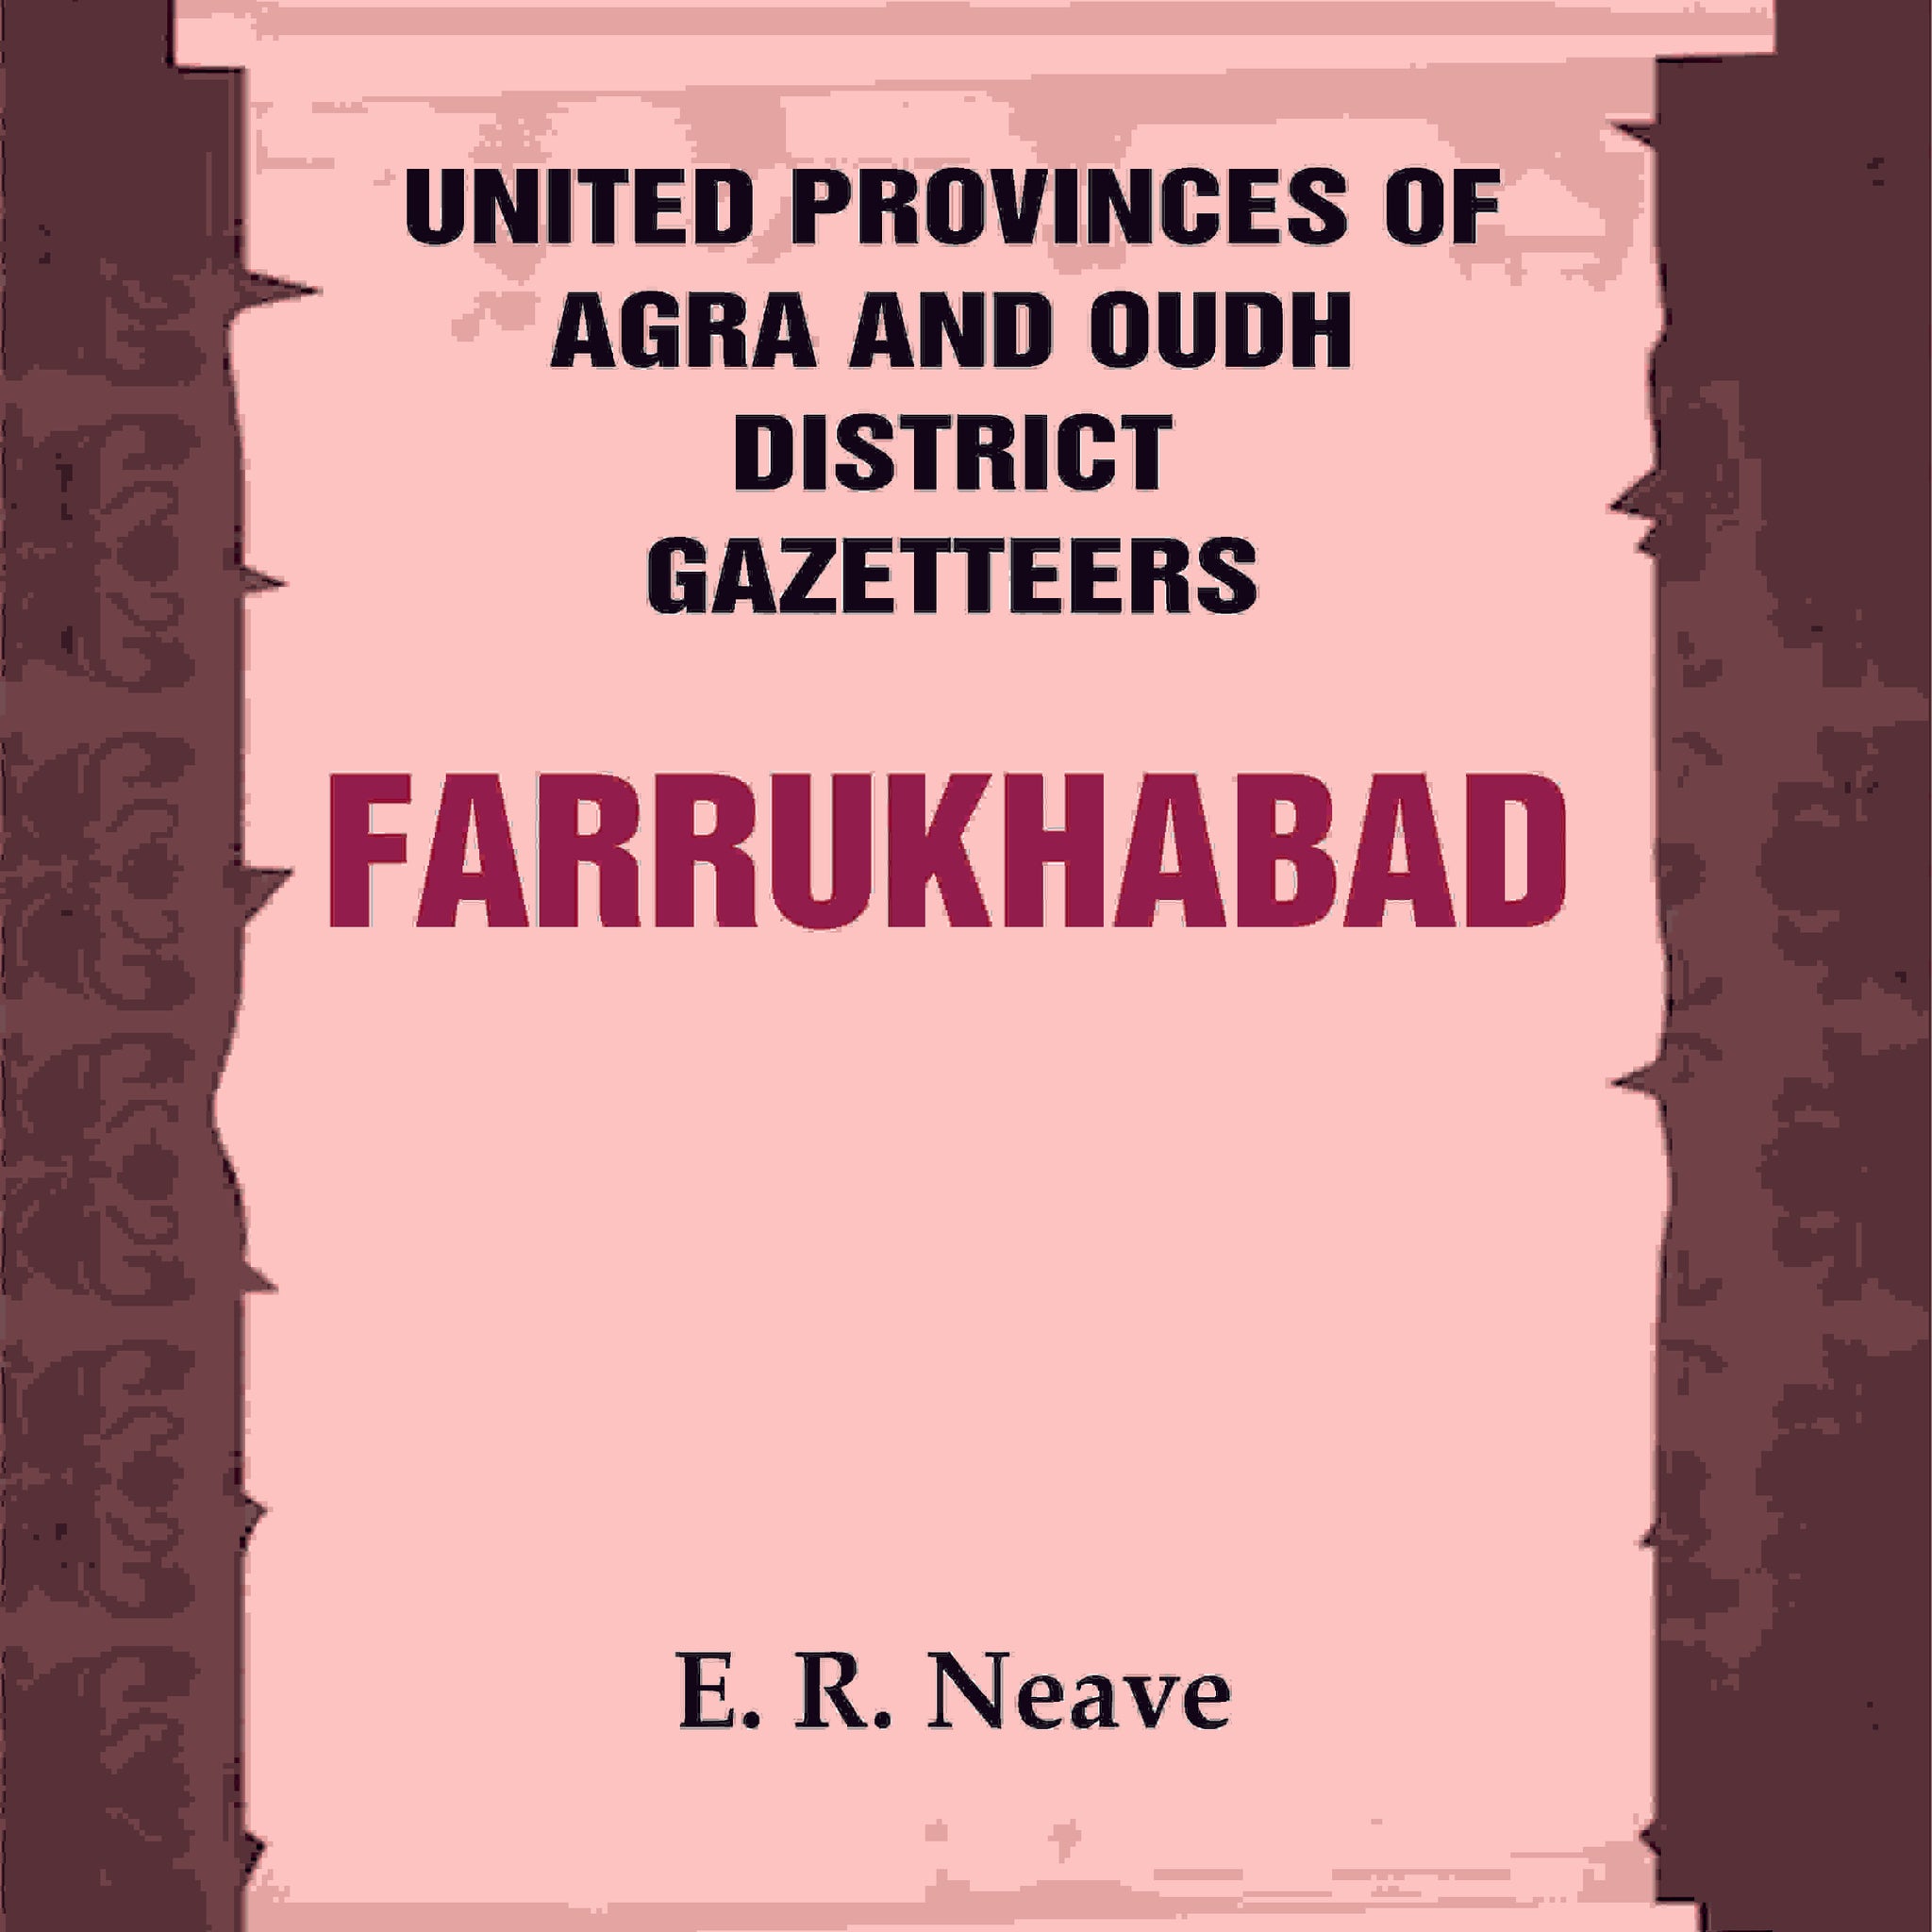 United Provinces of Agra and Oudh District Gazetteers: Farrukhabad